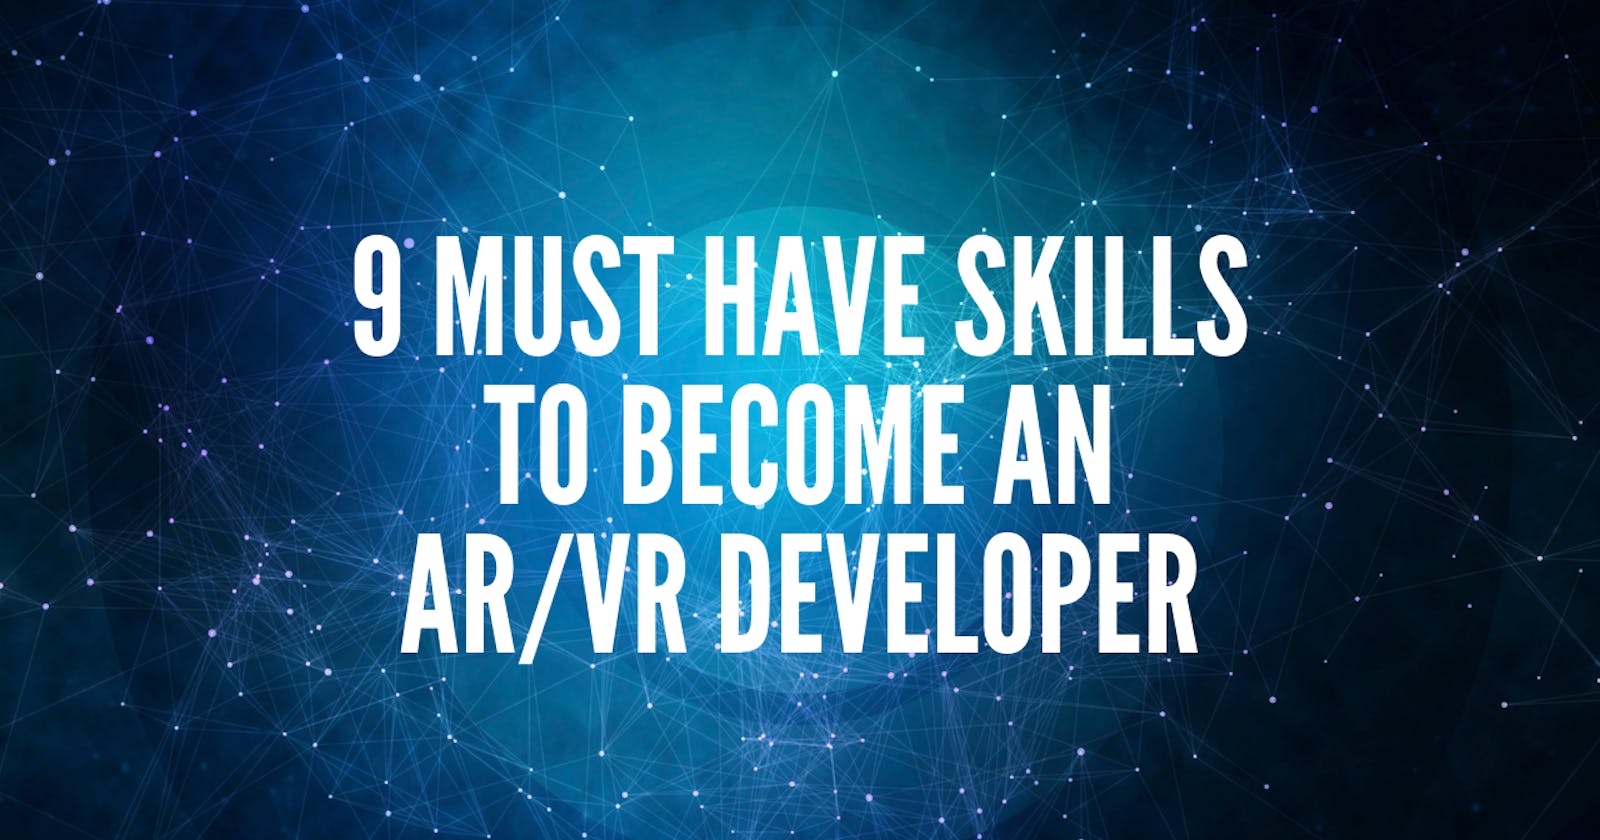 9 Must Have Skills To Become An AR/VR Developer (With Course Recommendations)